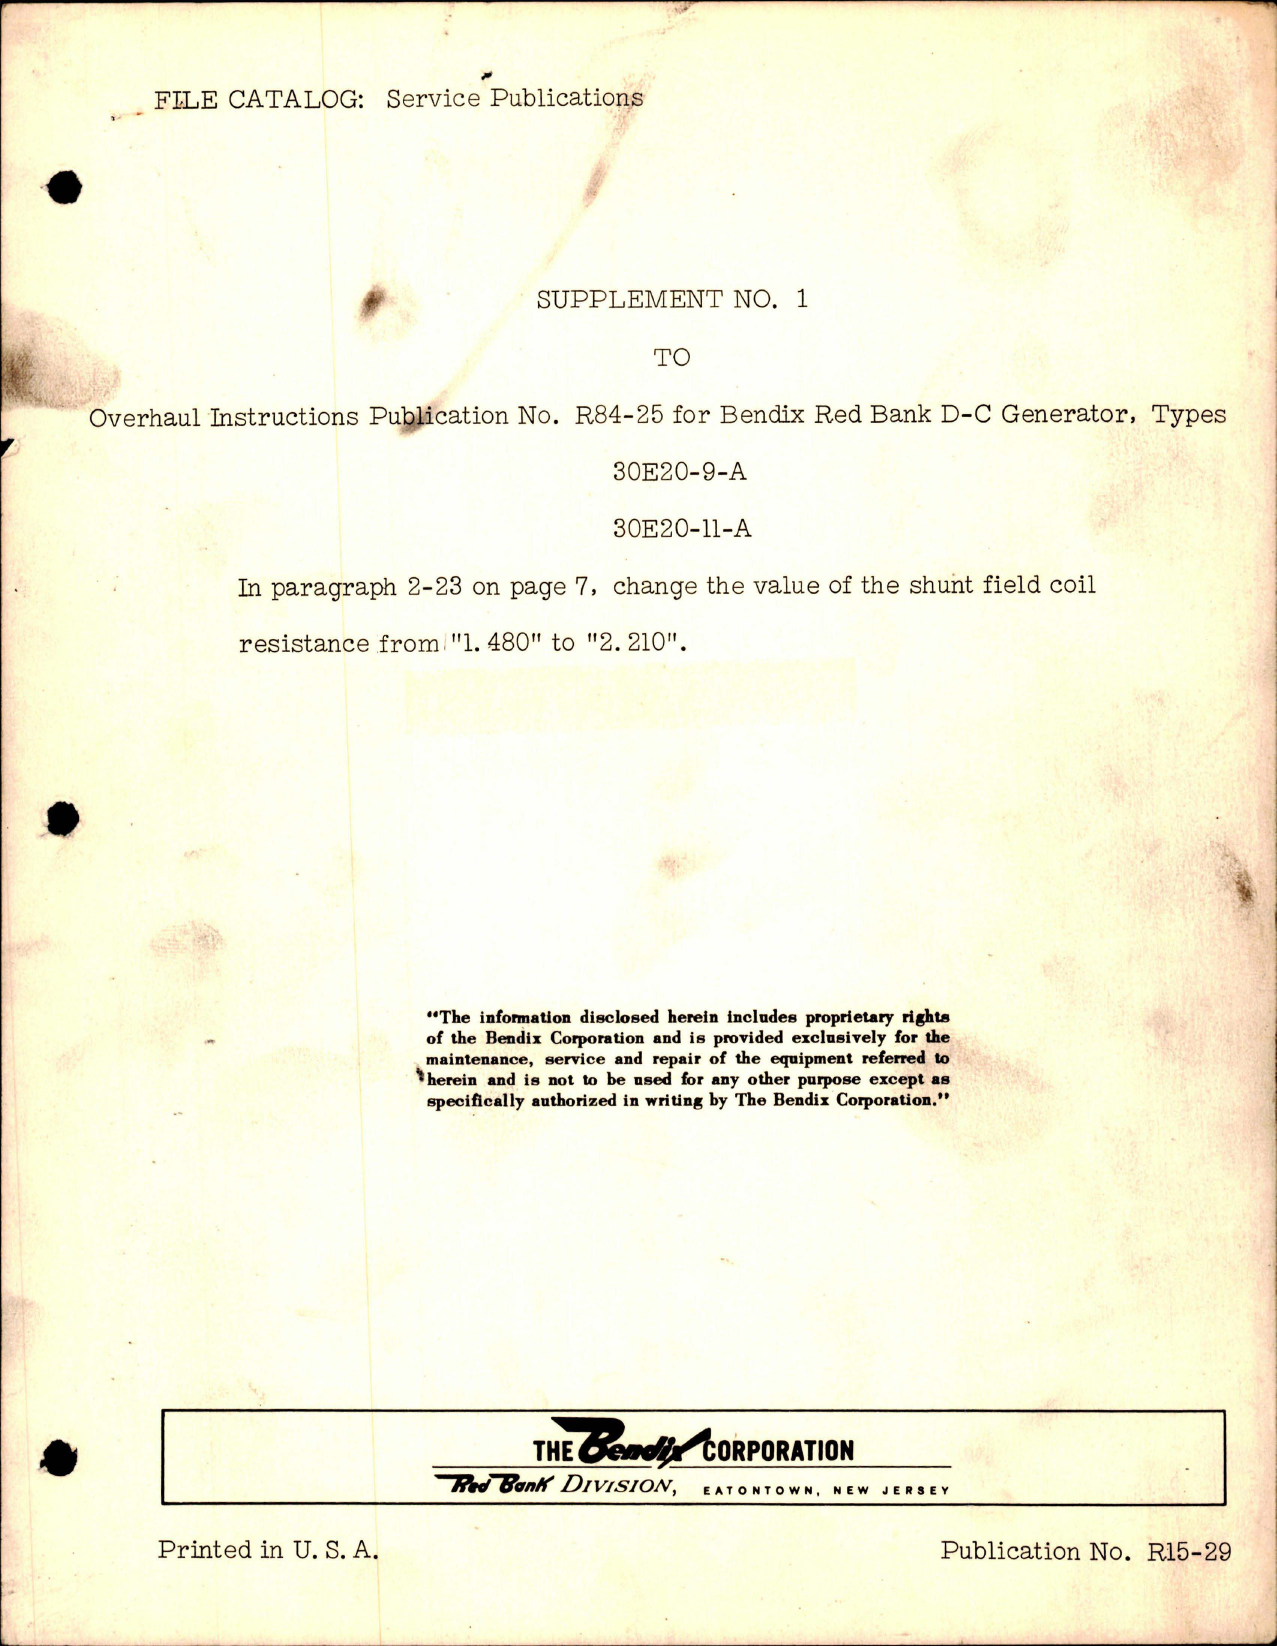 Sample page 1 from AirCorps Library document: Overhaul Instructions (Publication R84-25) for Bendix Red Bank D-C Generator - Type 30E20-9-A and 30E20-11-A